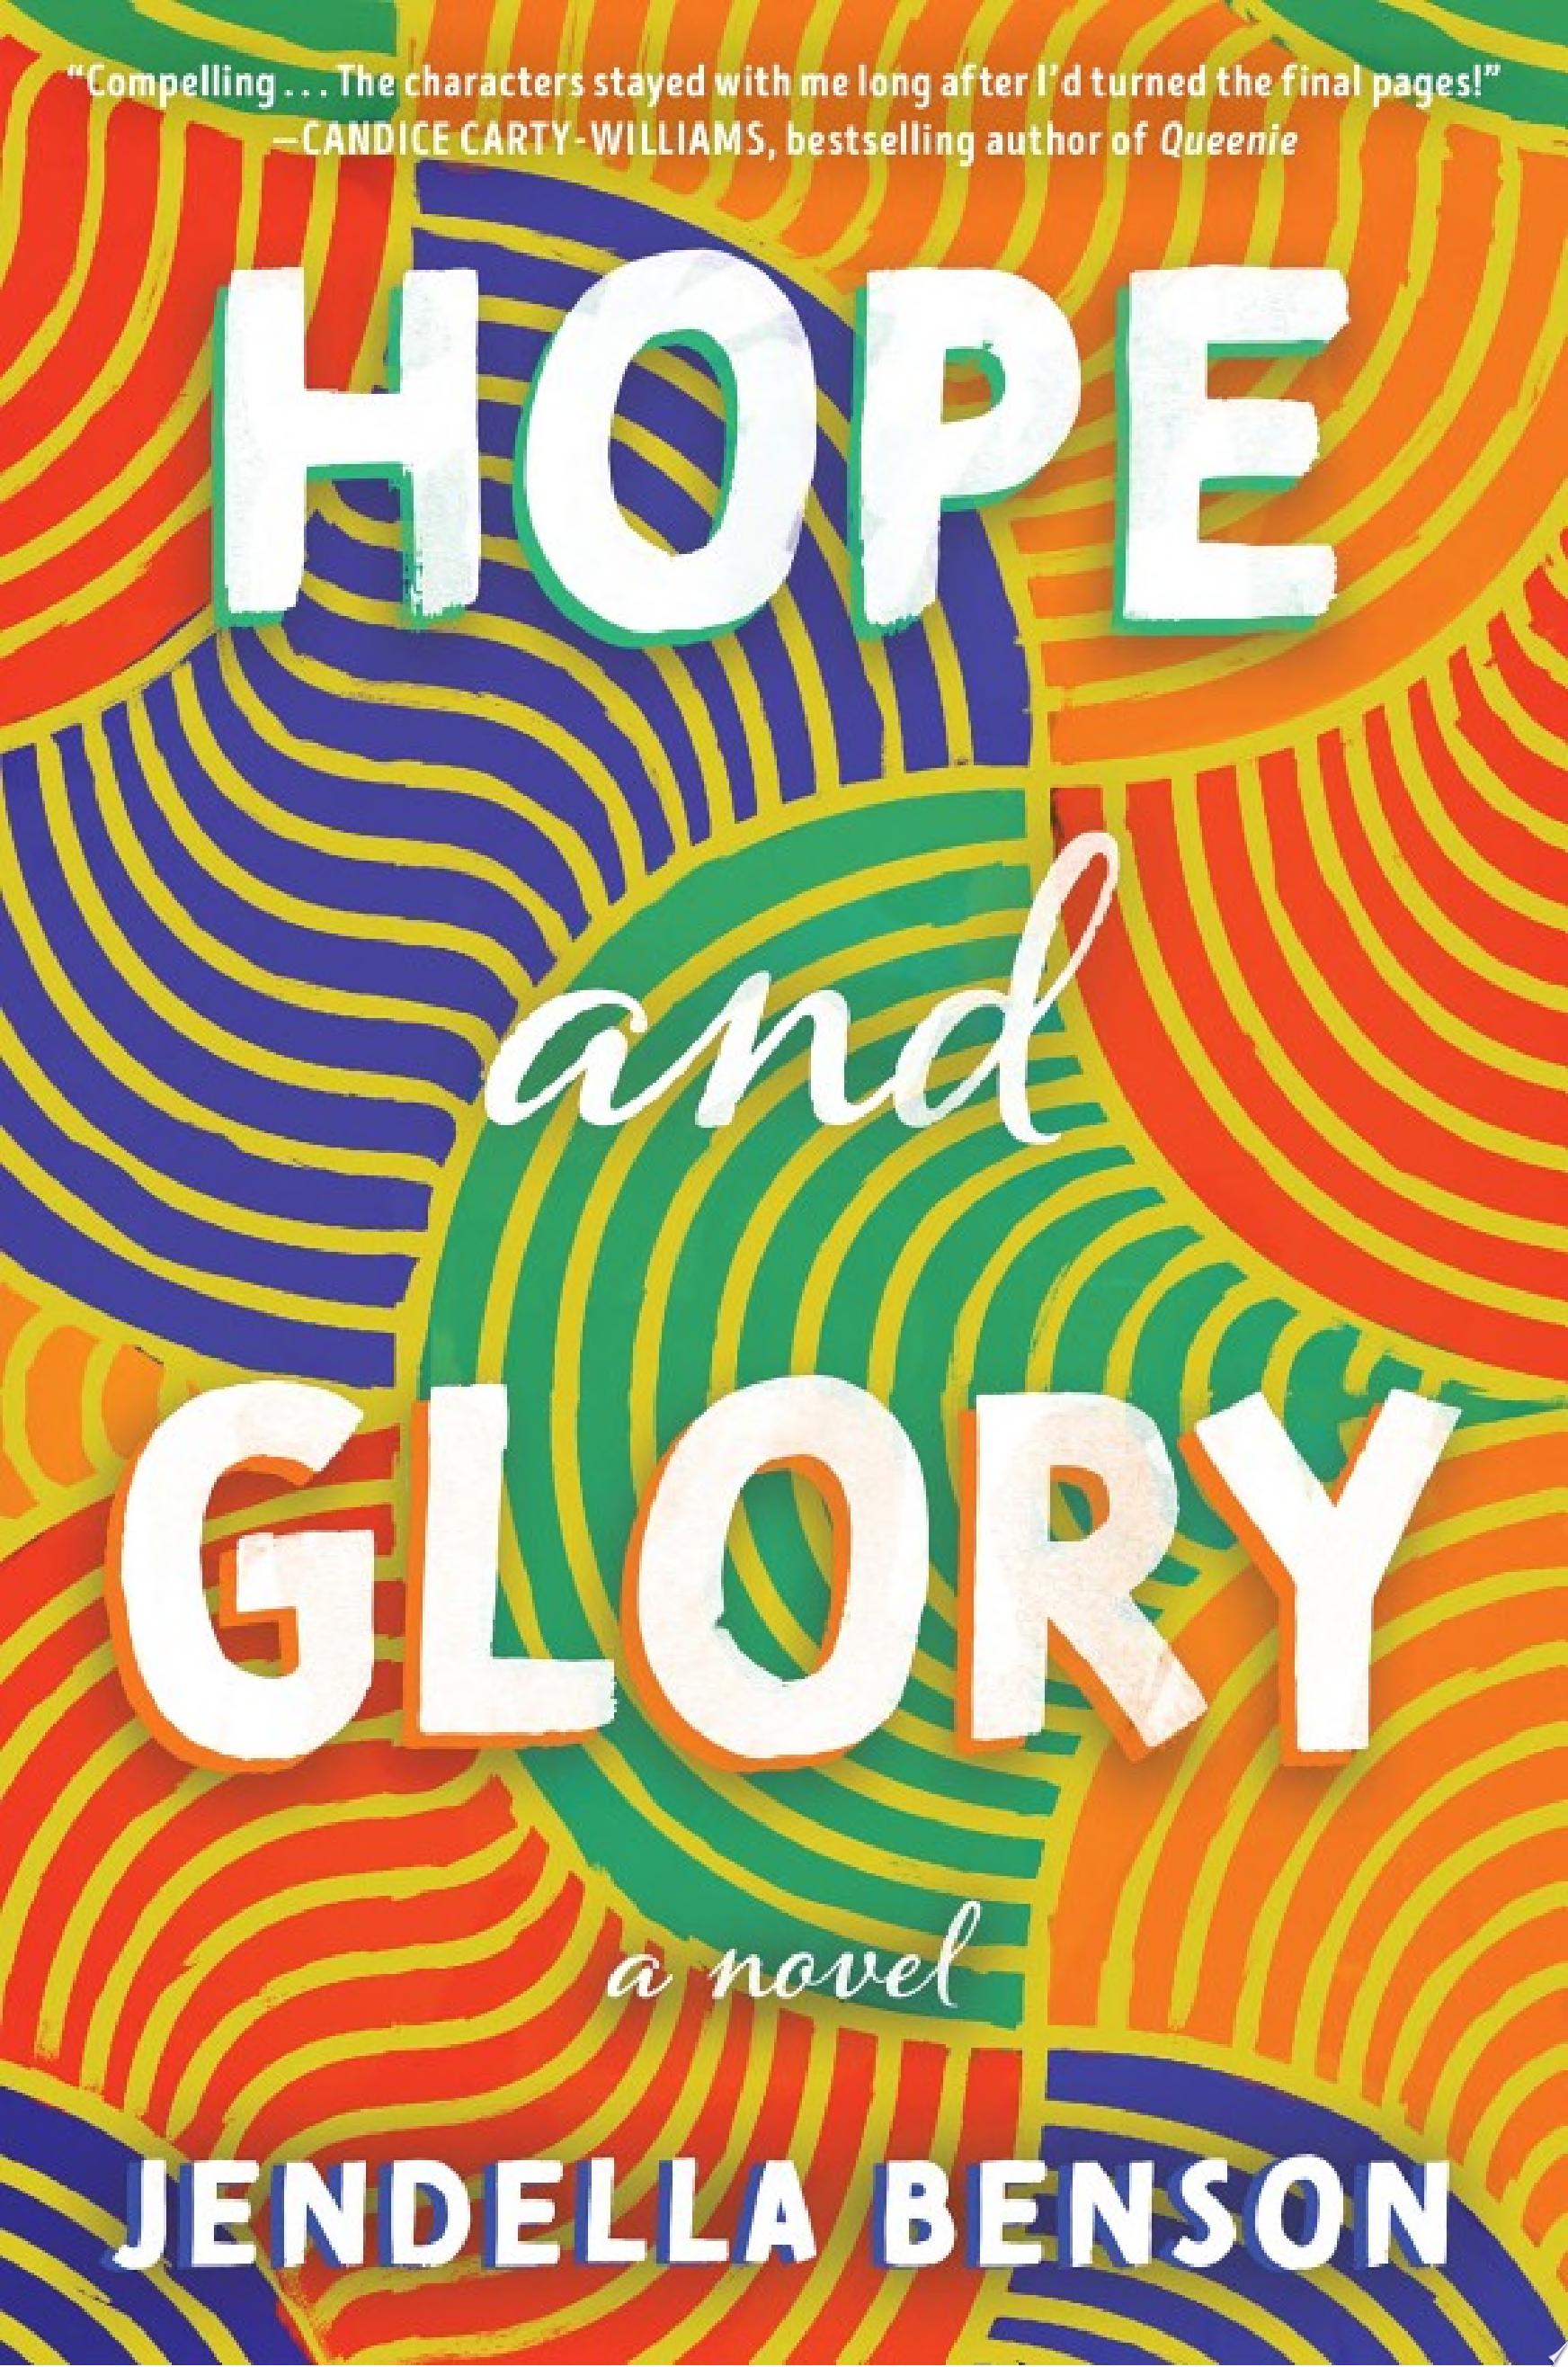 Image for "Hope and Glory"